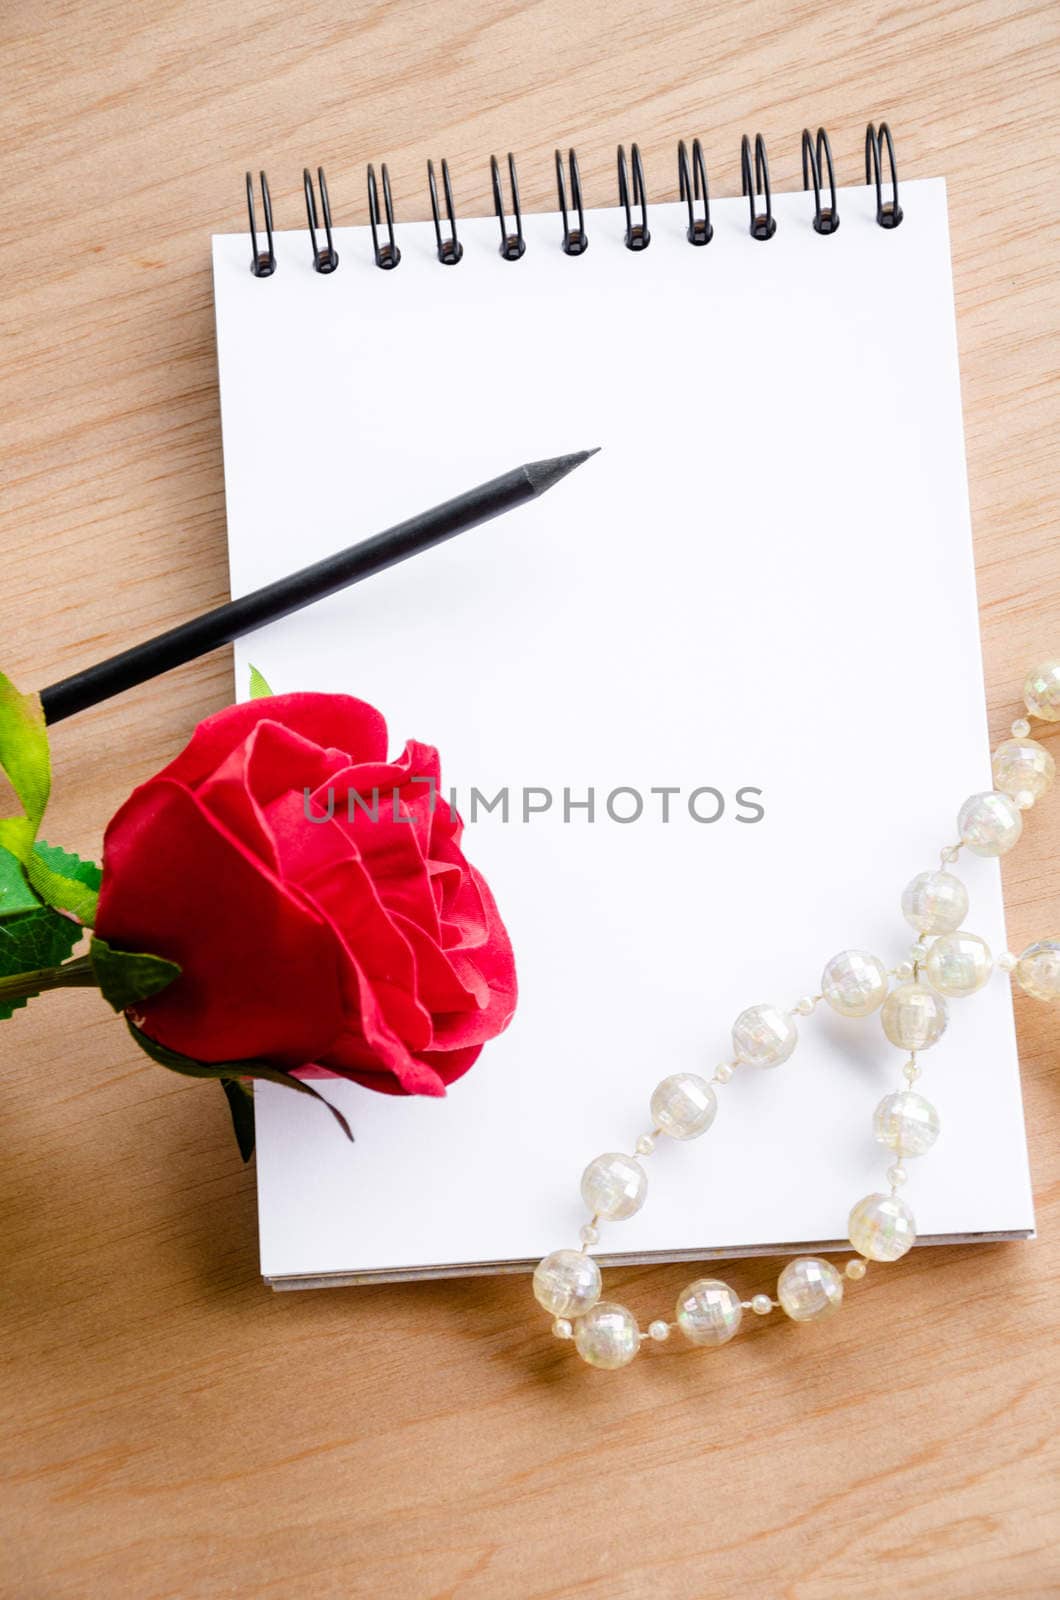 Red rose and blank diary. by Gamjai